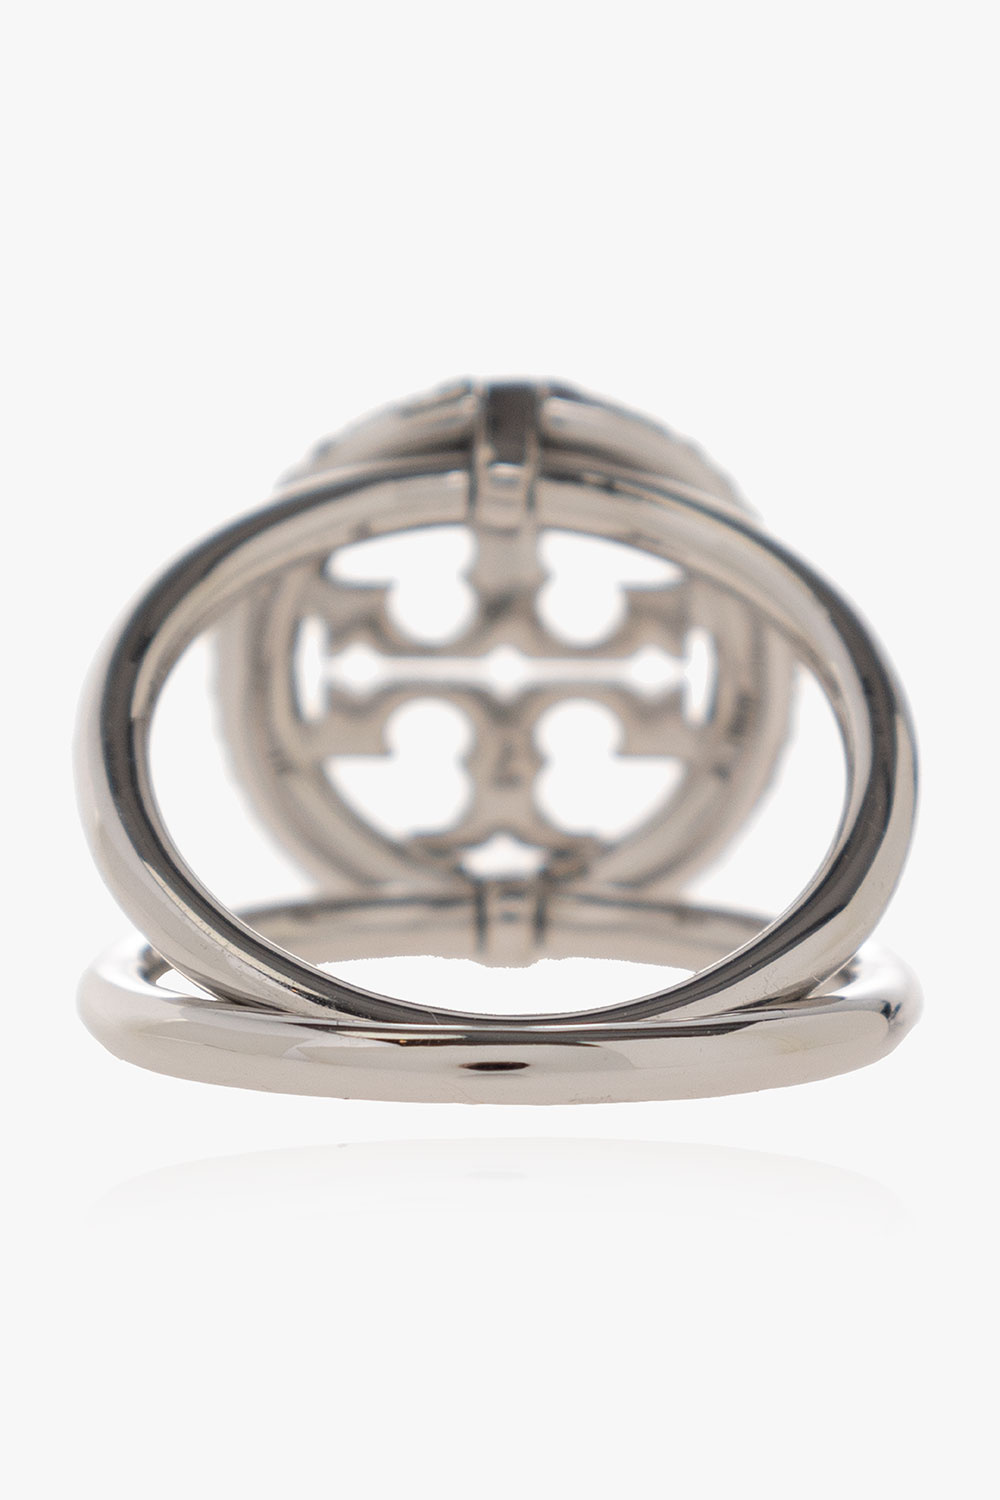 Tory Burch ‘Miller’ double ring